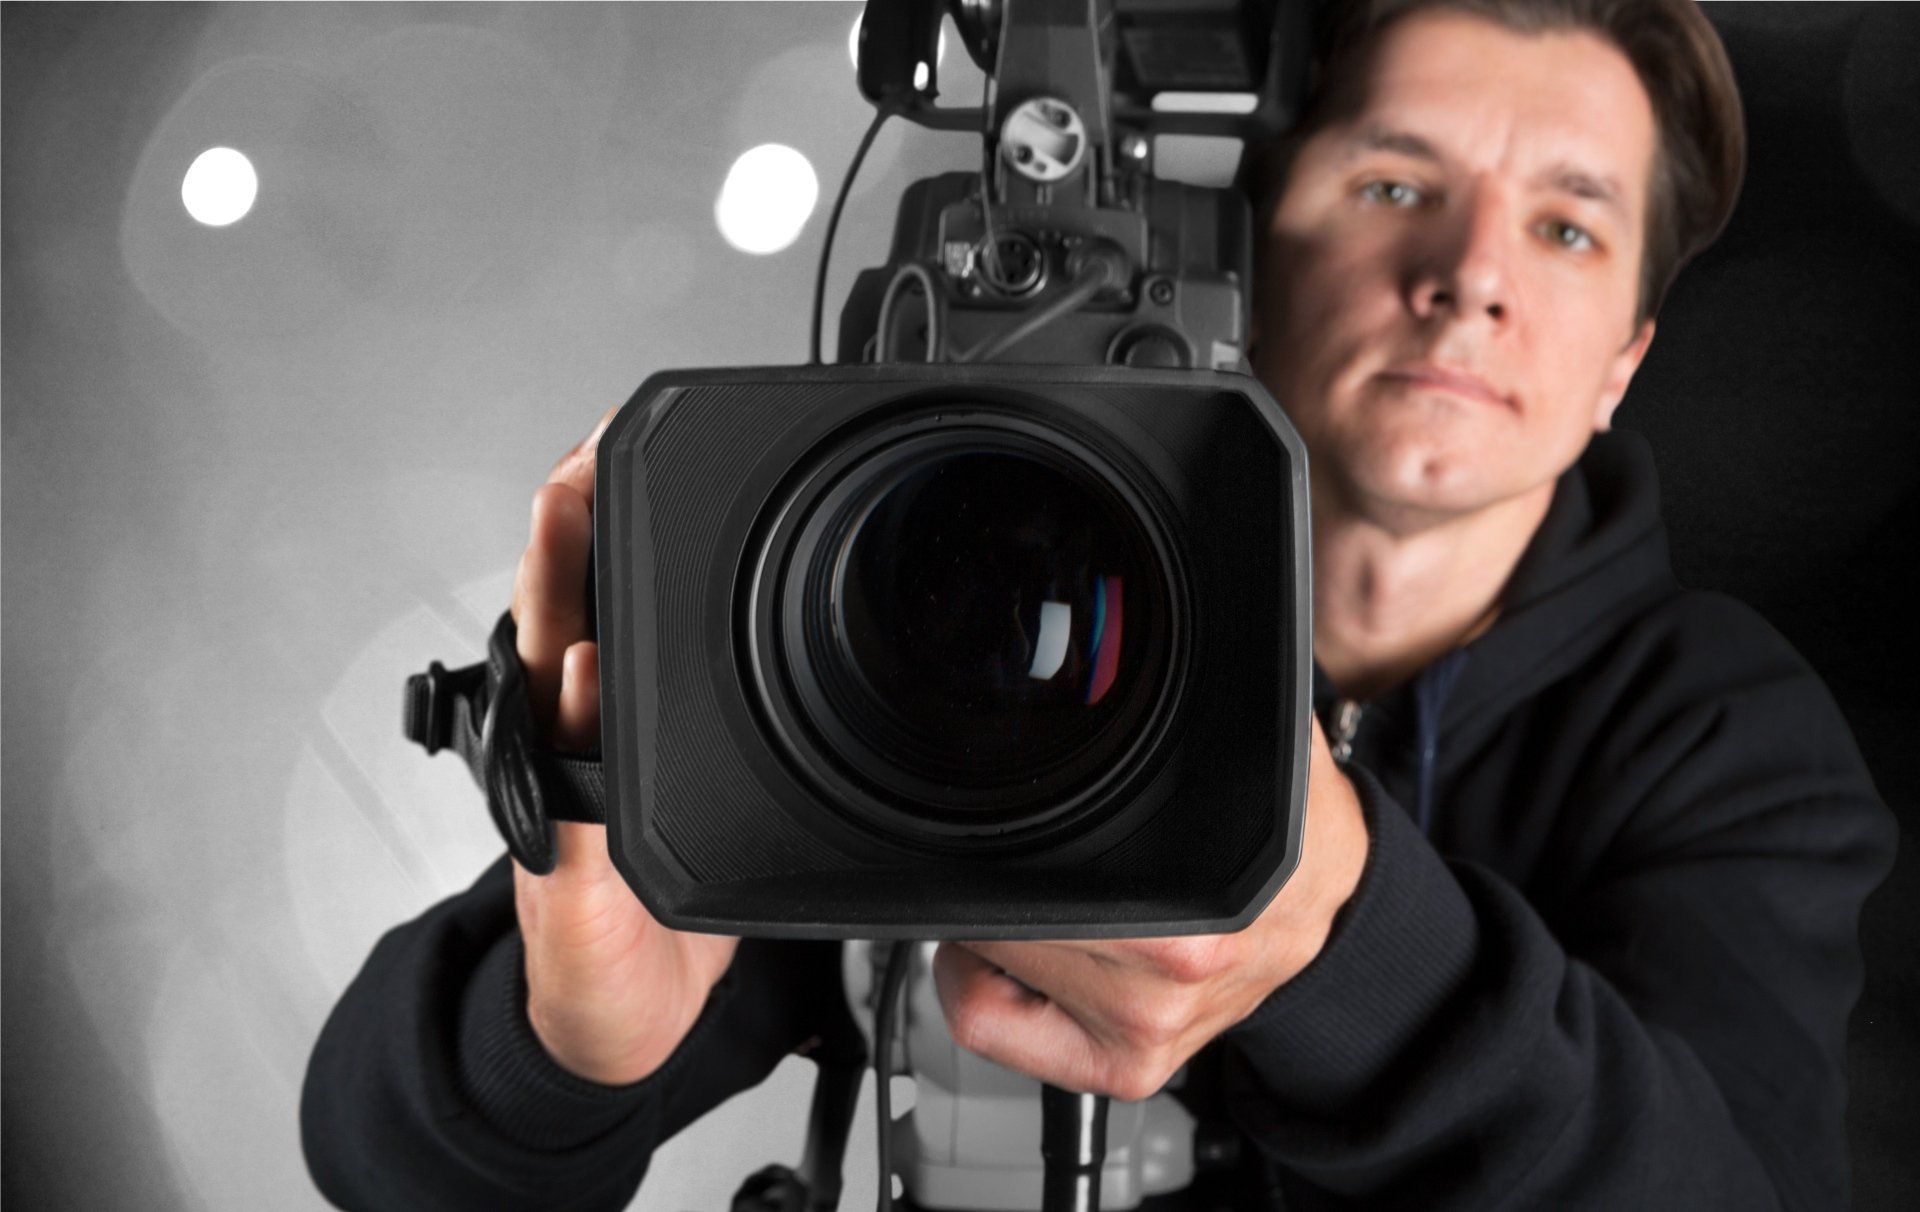 Top Five Questions to Ask When Hiring a Video Production Professional